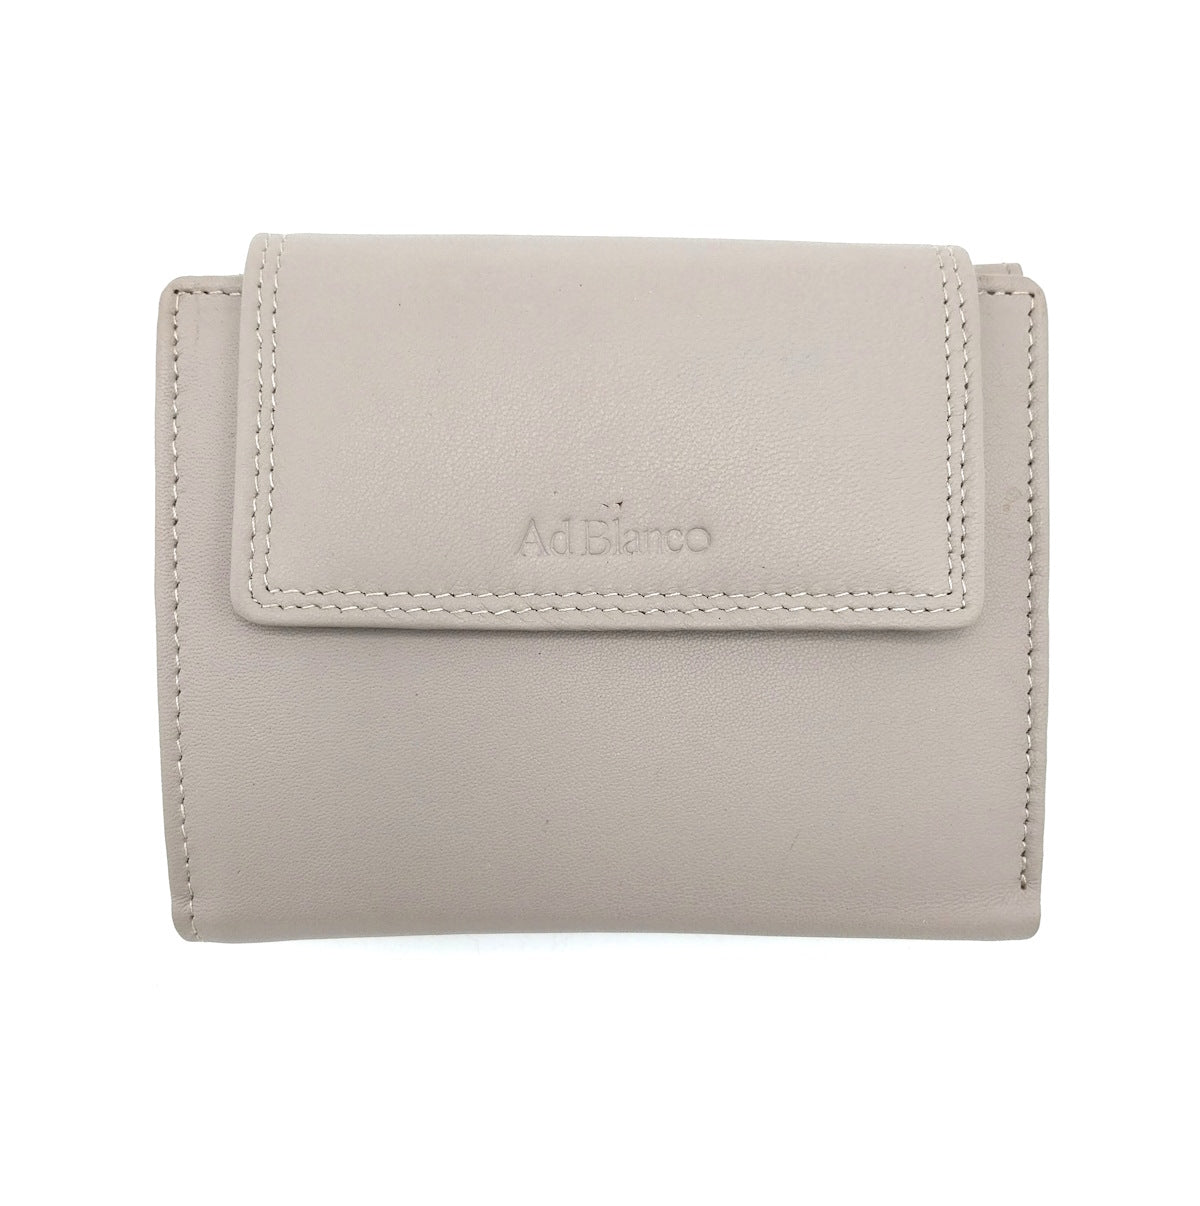 Genuine leather wallet, Ad Blanco, art. 2212.422